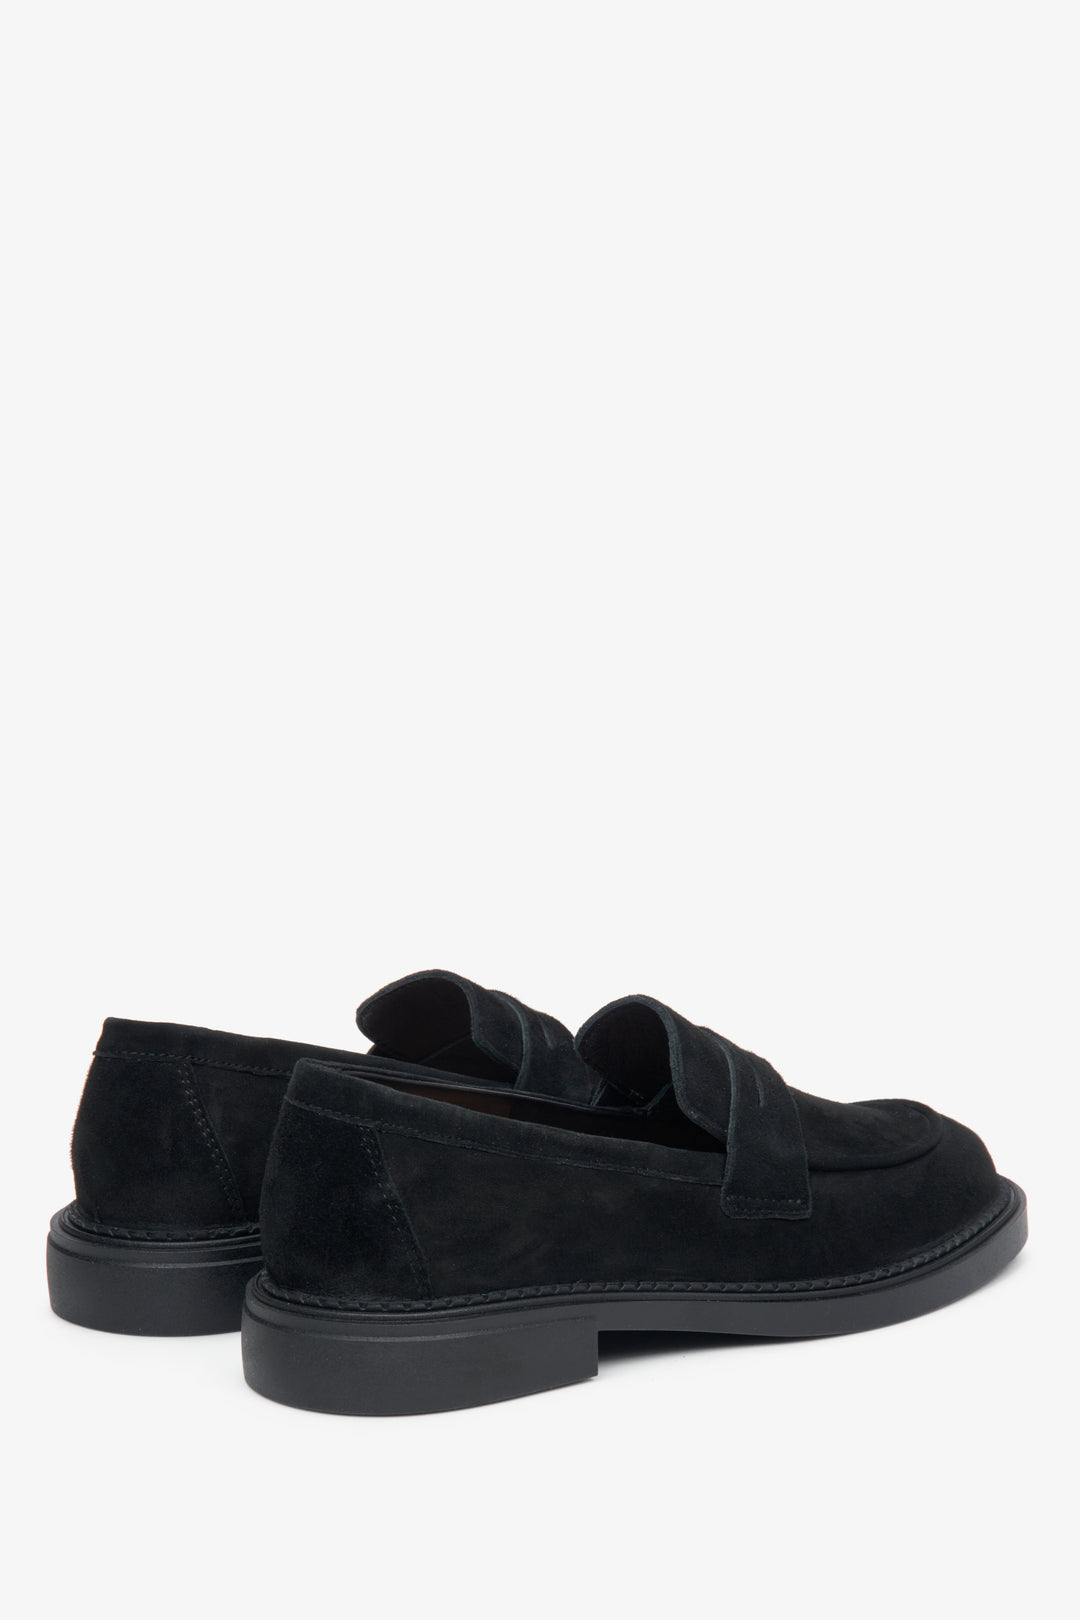 Women's suede moccasins in black Estro - a close-up of the heel.